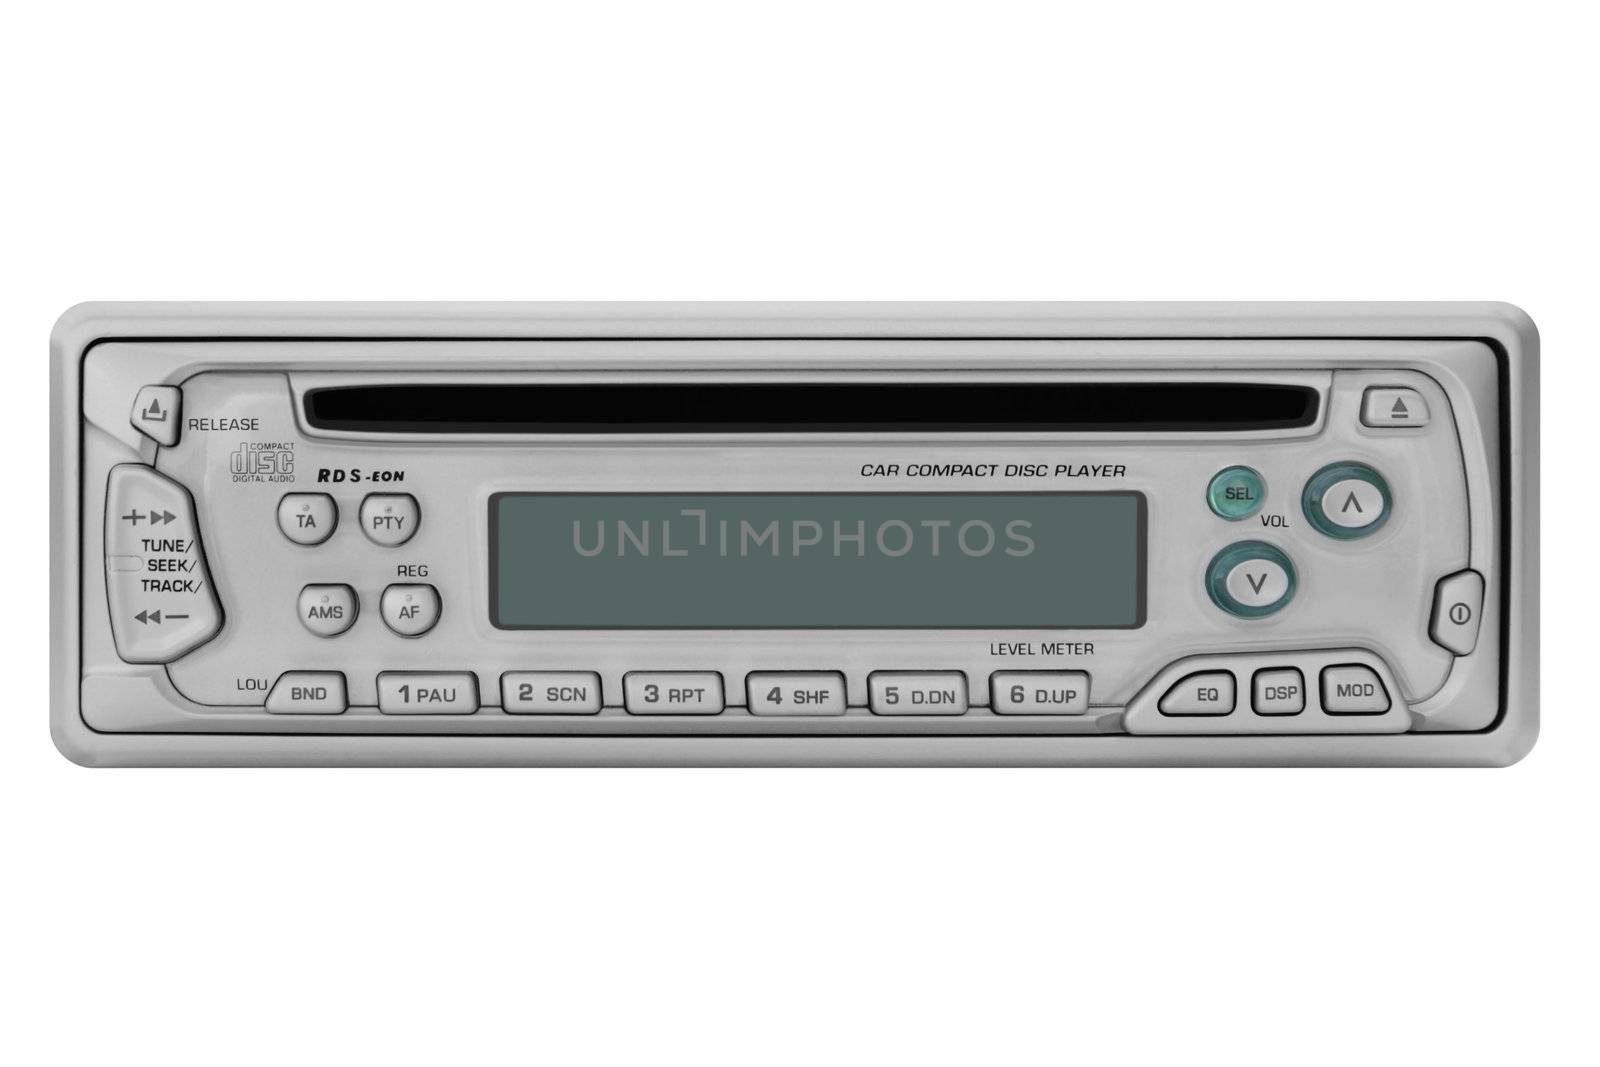 This image shows a front view from a car radio with disc player